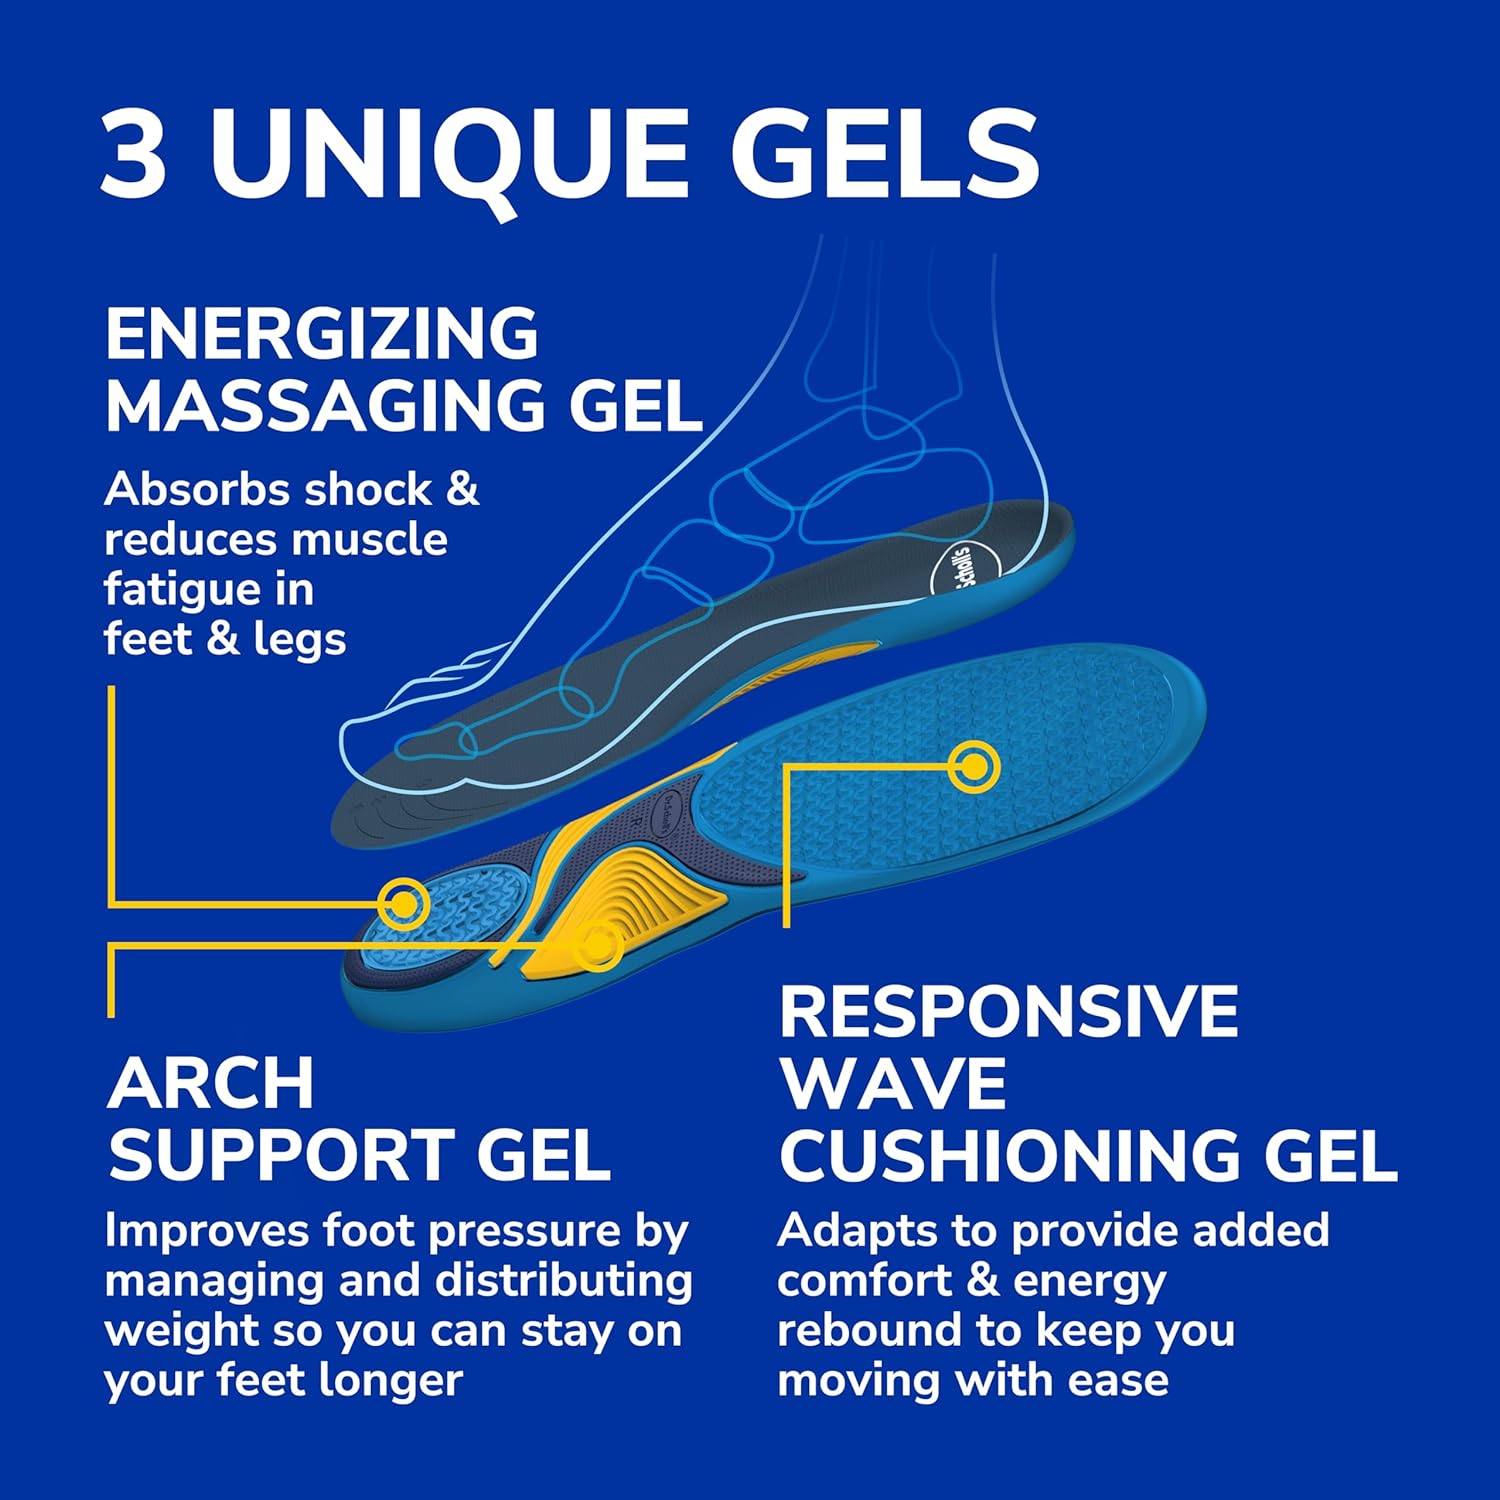 Dr. Scholl’s Energizing Comfort Everyday Insoles with Massaging Gel®, On Your Feet All-Day Energy, Shock Absorbing, Arch Support, Trim Inserts to Fit Shoes, Womens Size 6-10, 1 Pair